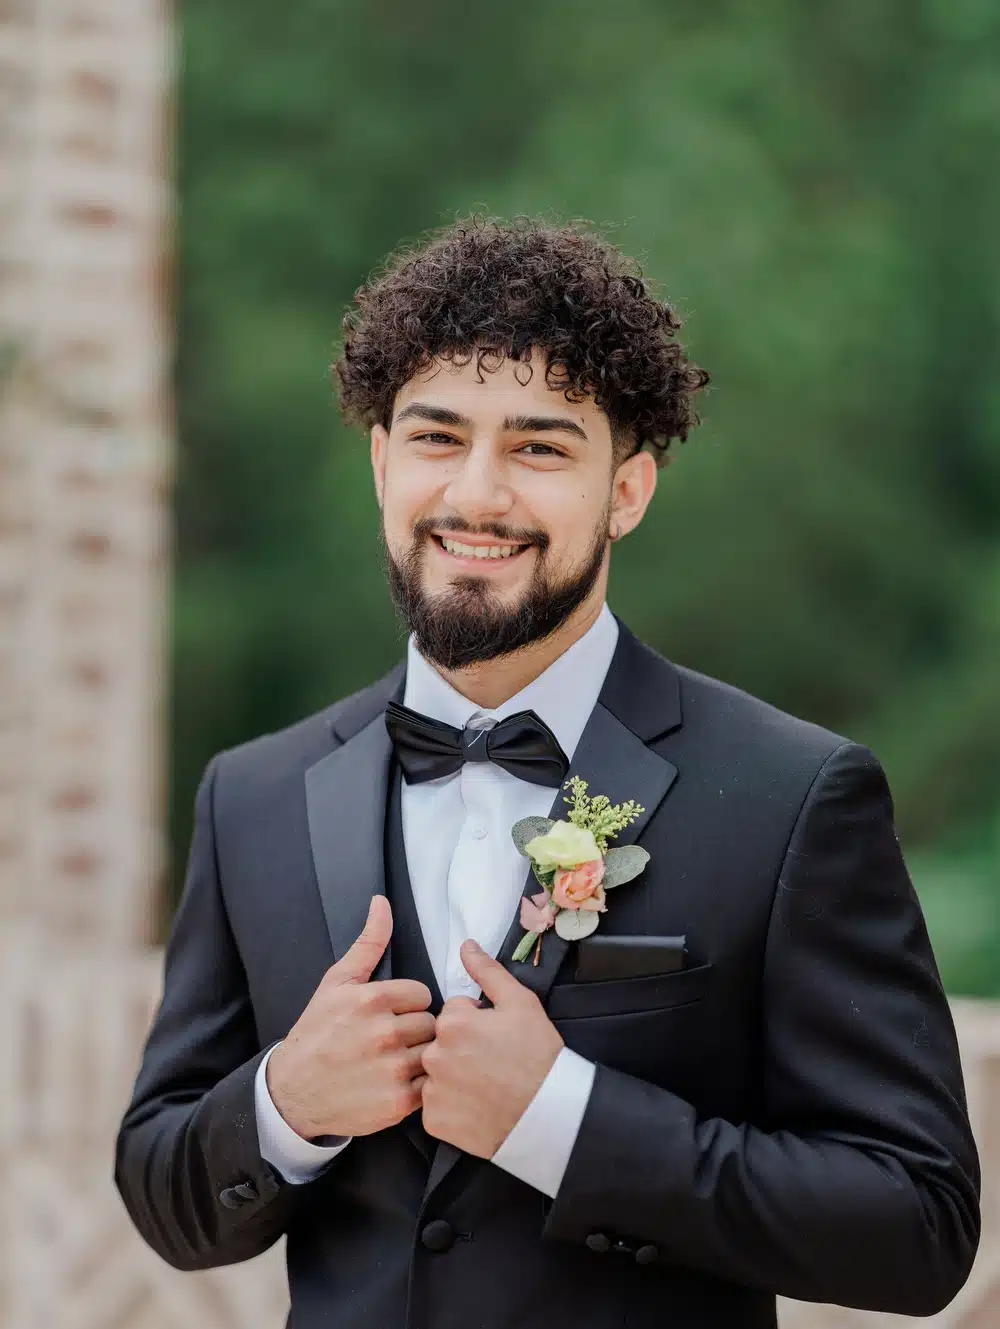 Man with curly hair smiling outside while holding on to the lapels of his black wedding tuxedo for a black-tie wedding